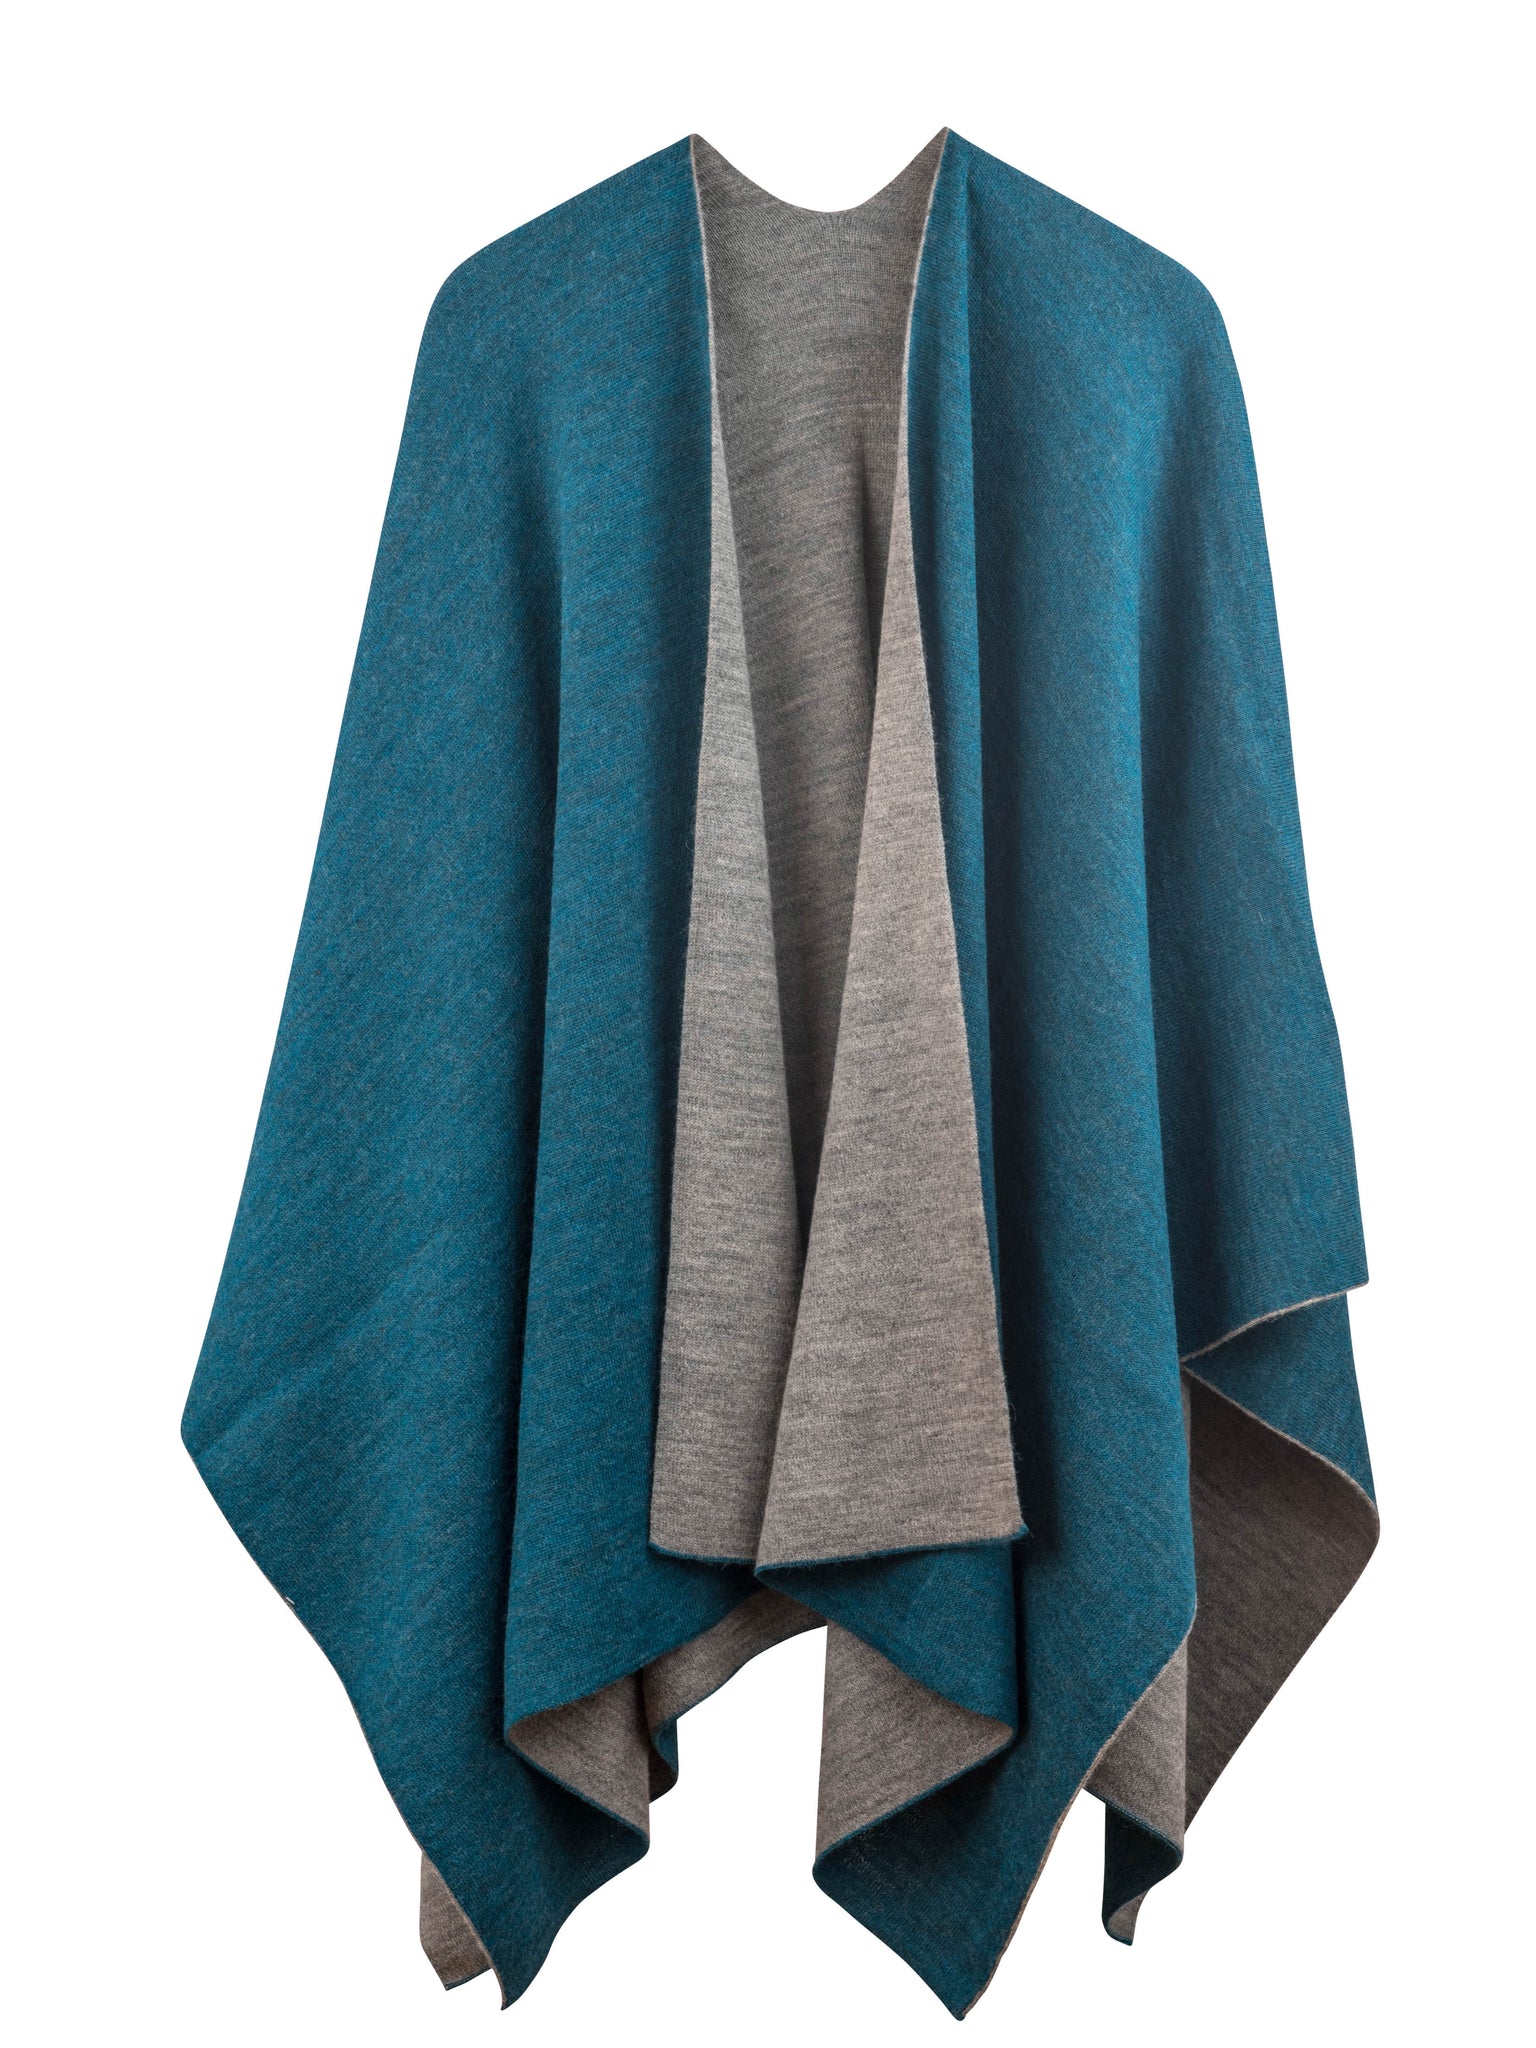 Irish Pure Lambswool Cape, Ruana, Wrap , Shawl - 100% Pure New Wool -  grey/blue check - supersoft - one size fits all - HANDMADE IN IRELAND